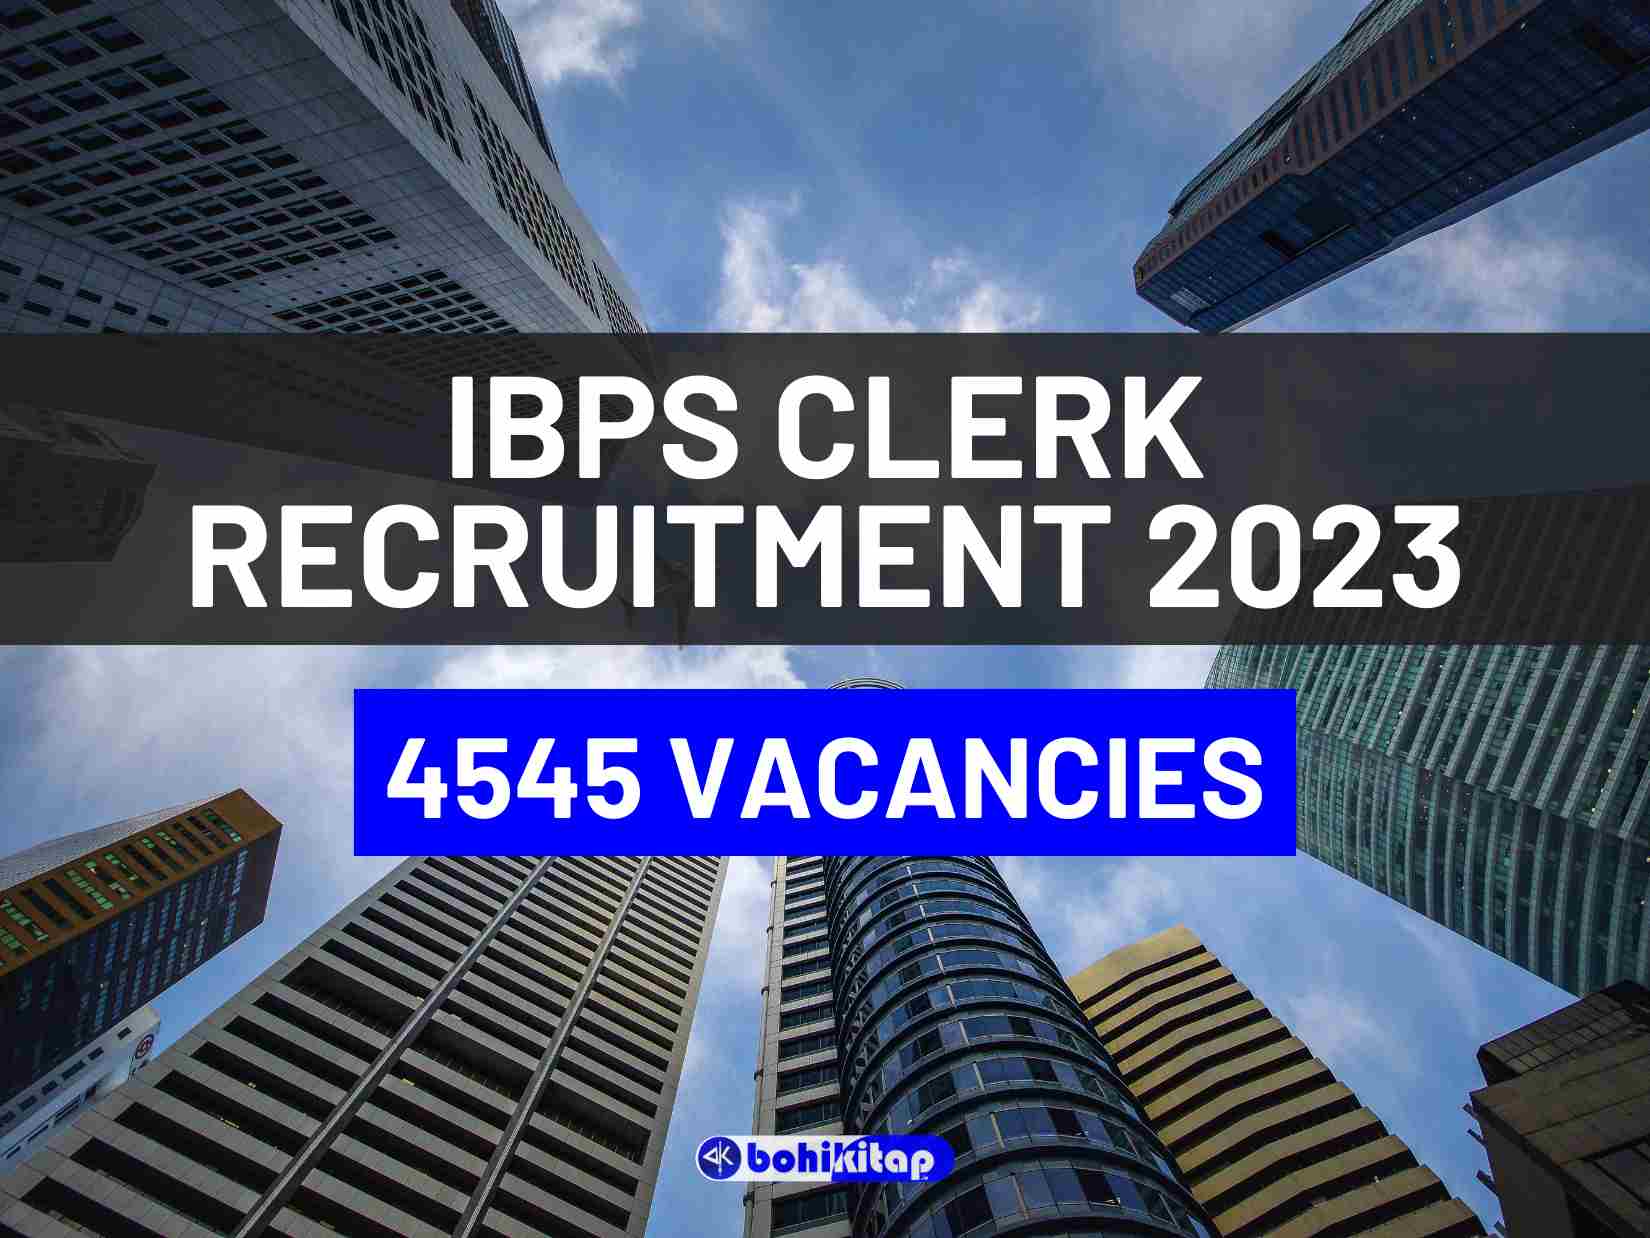 IBPS Clerk Recruitment 2023: IPBS is inviting application from eligible candidates for the post of 4545 clerical vacancies; know more.